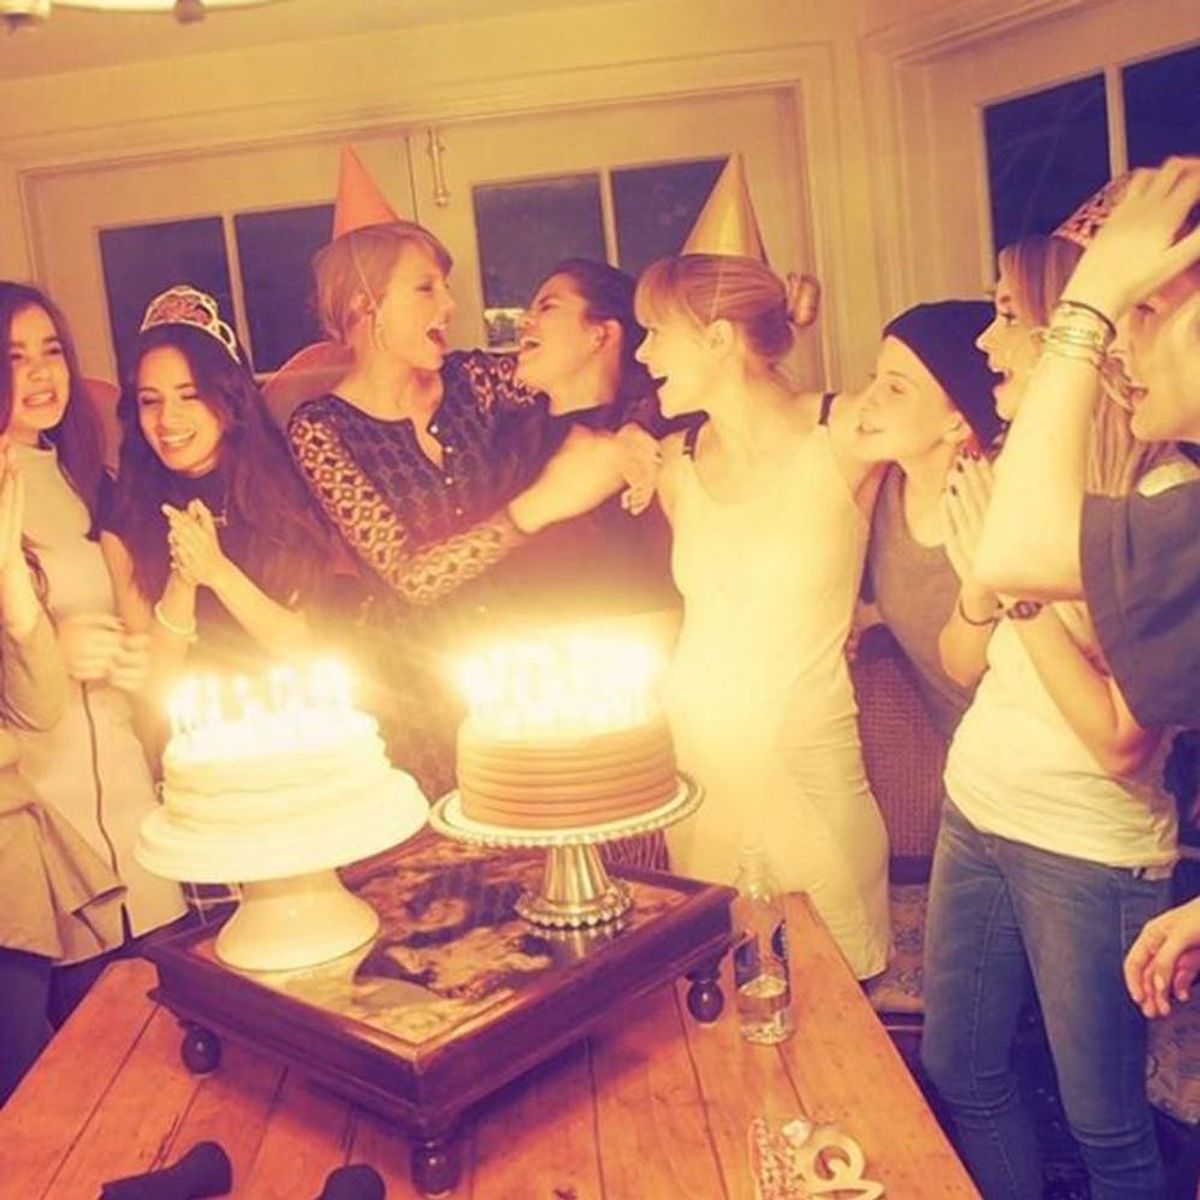 Blake Lively Made Taylor Swift the Most Hilarious Birthday Gift Ever